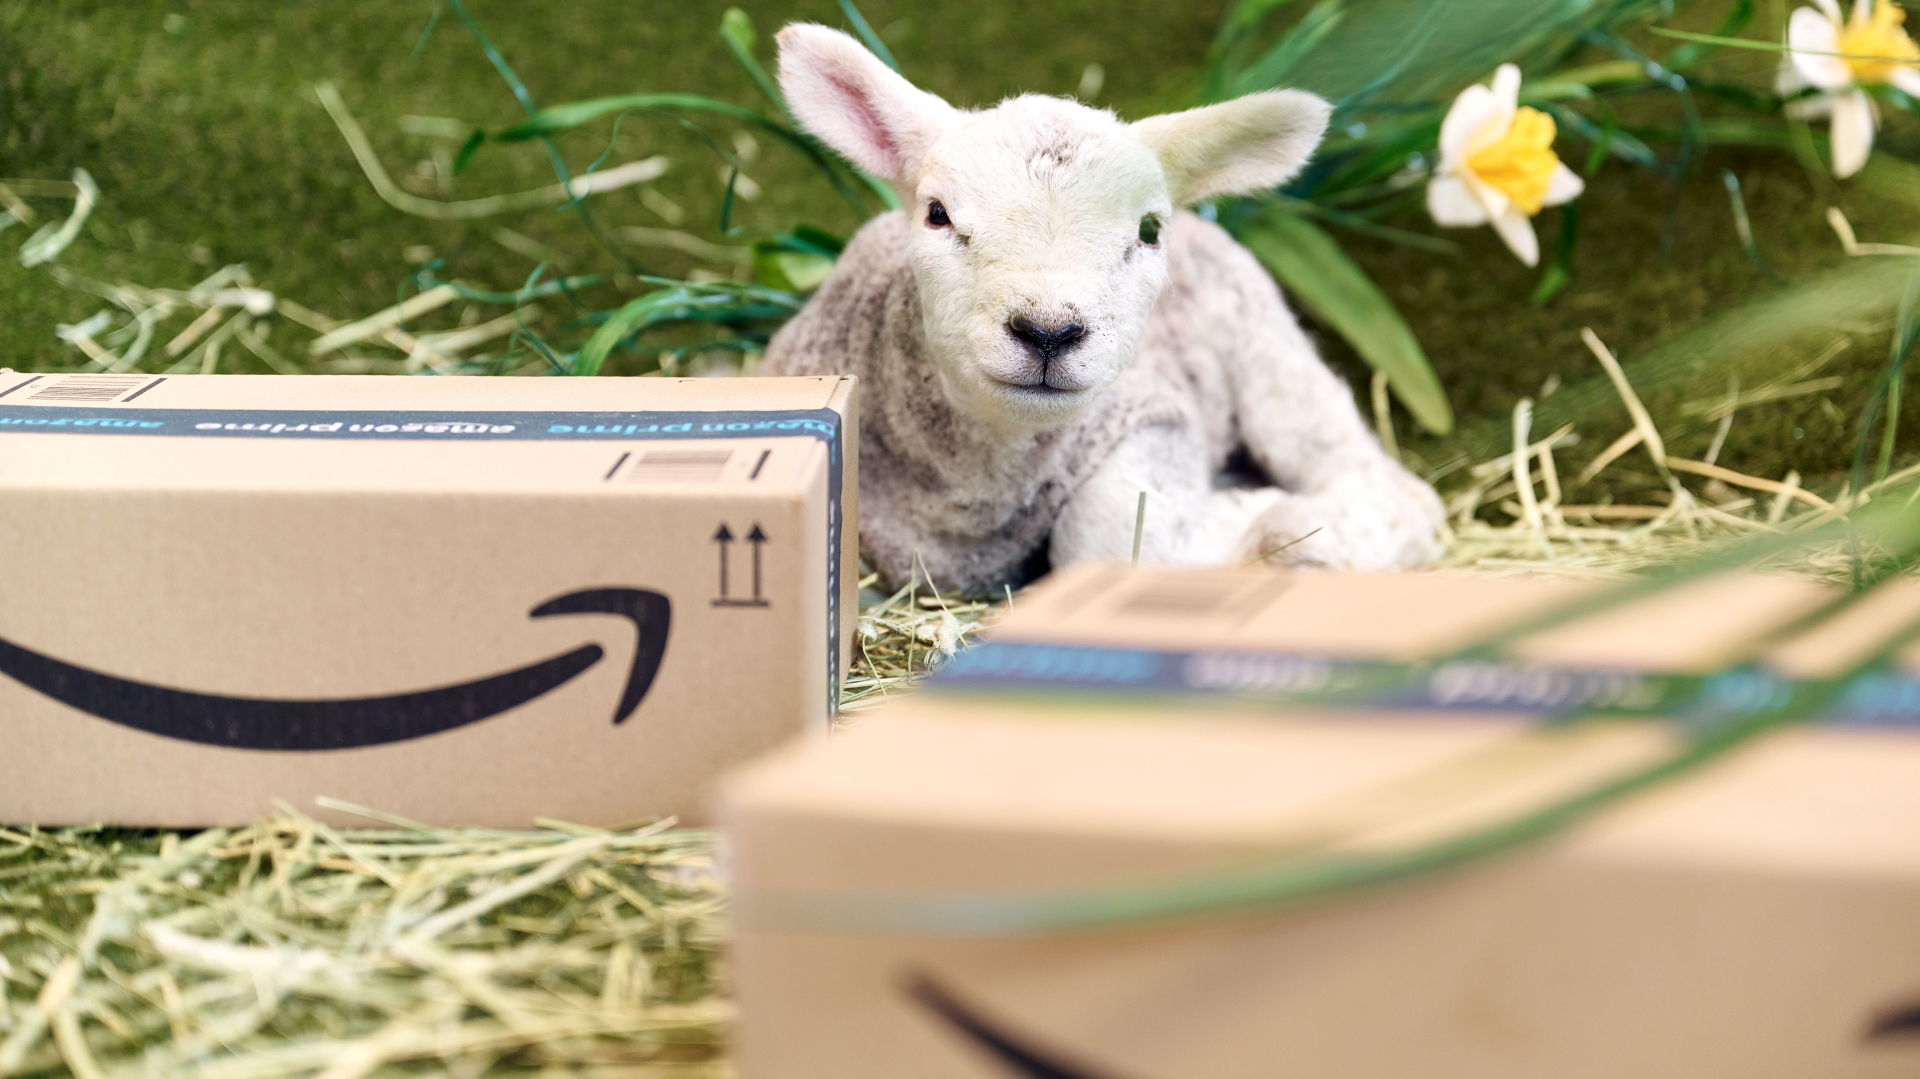 A ewe sitting on some hay, next to several Amazon boxes.